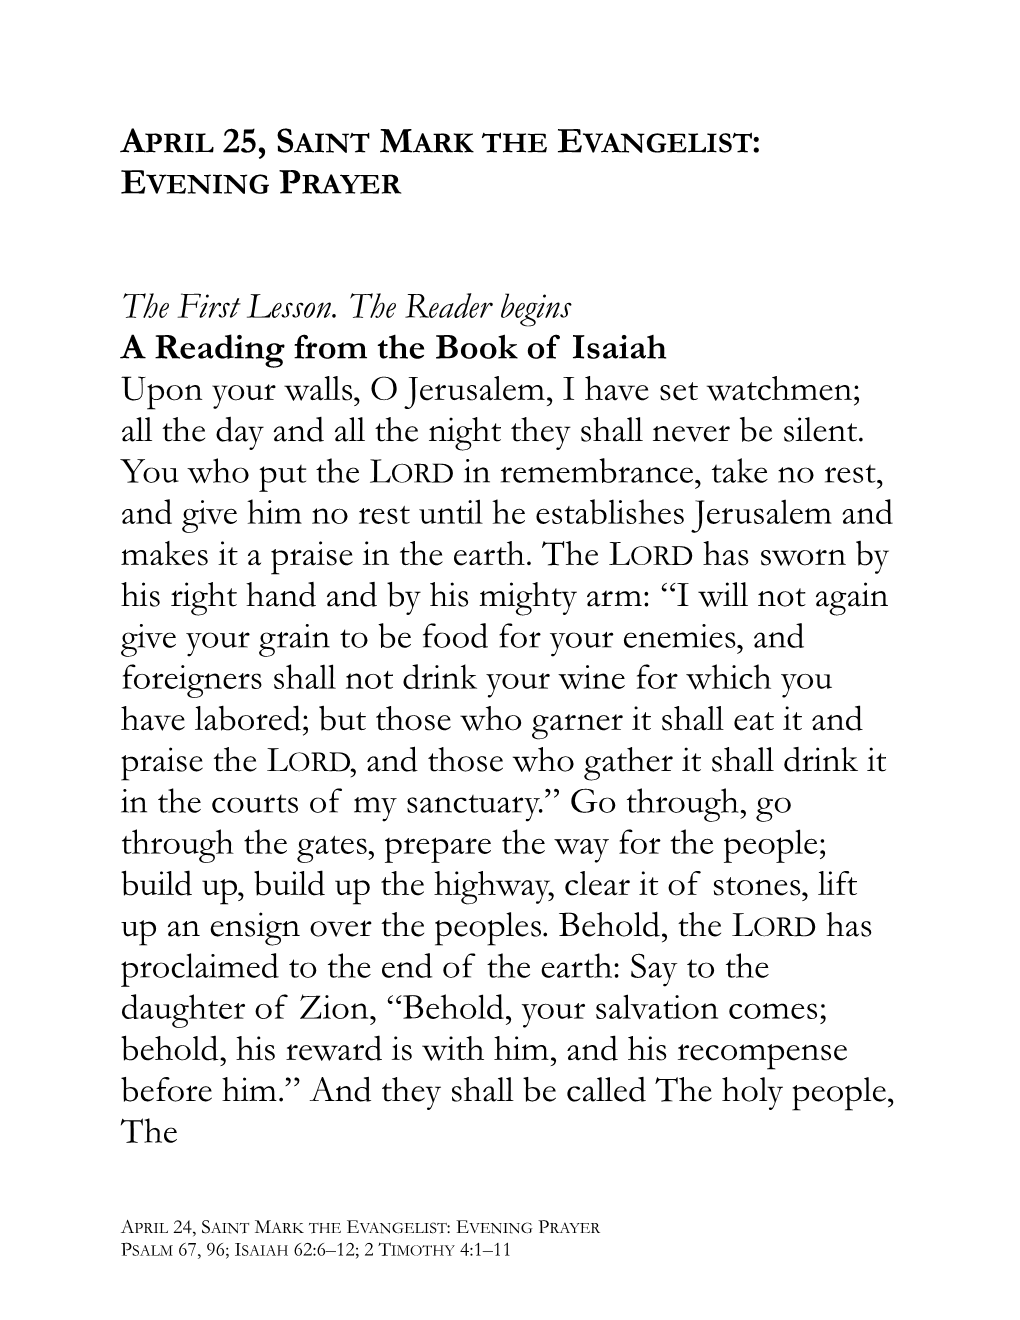 The First Lesson. the Reader Begins a Reading from the Book of Isaiah